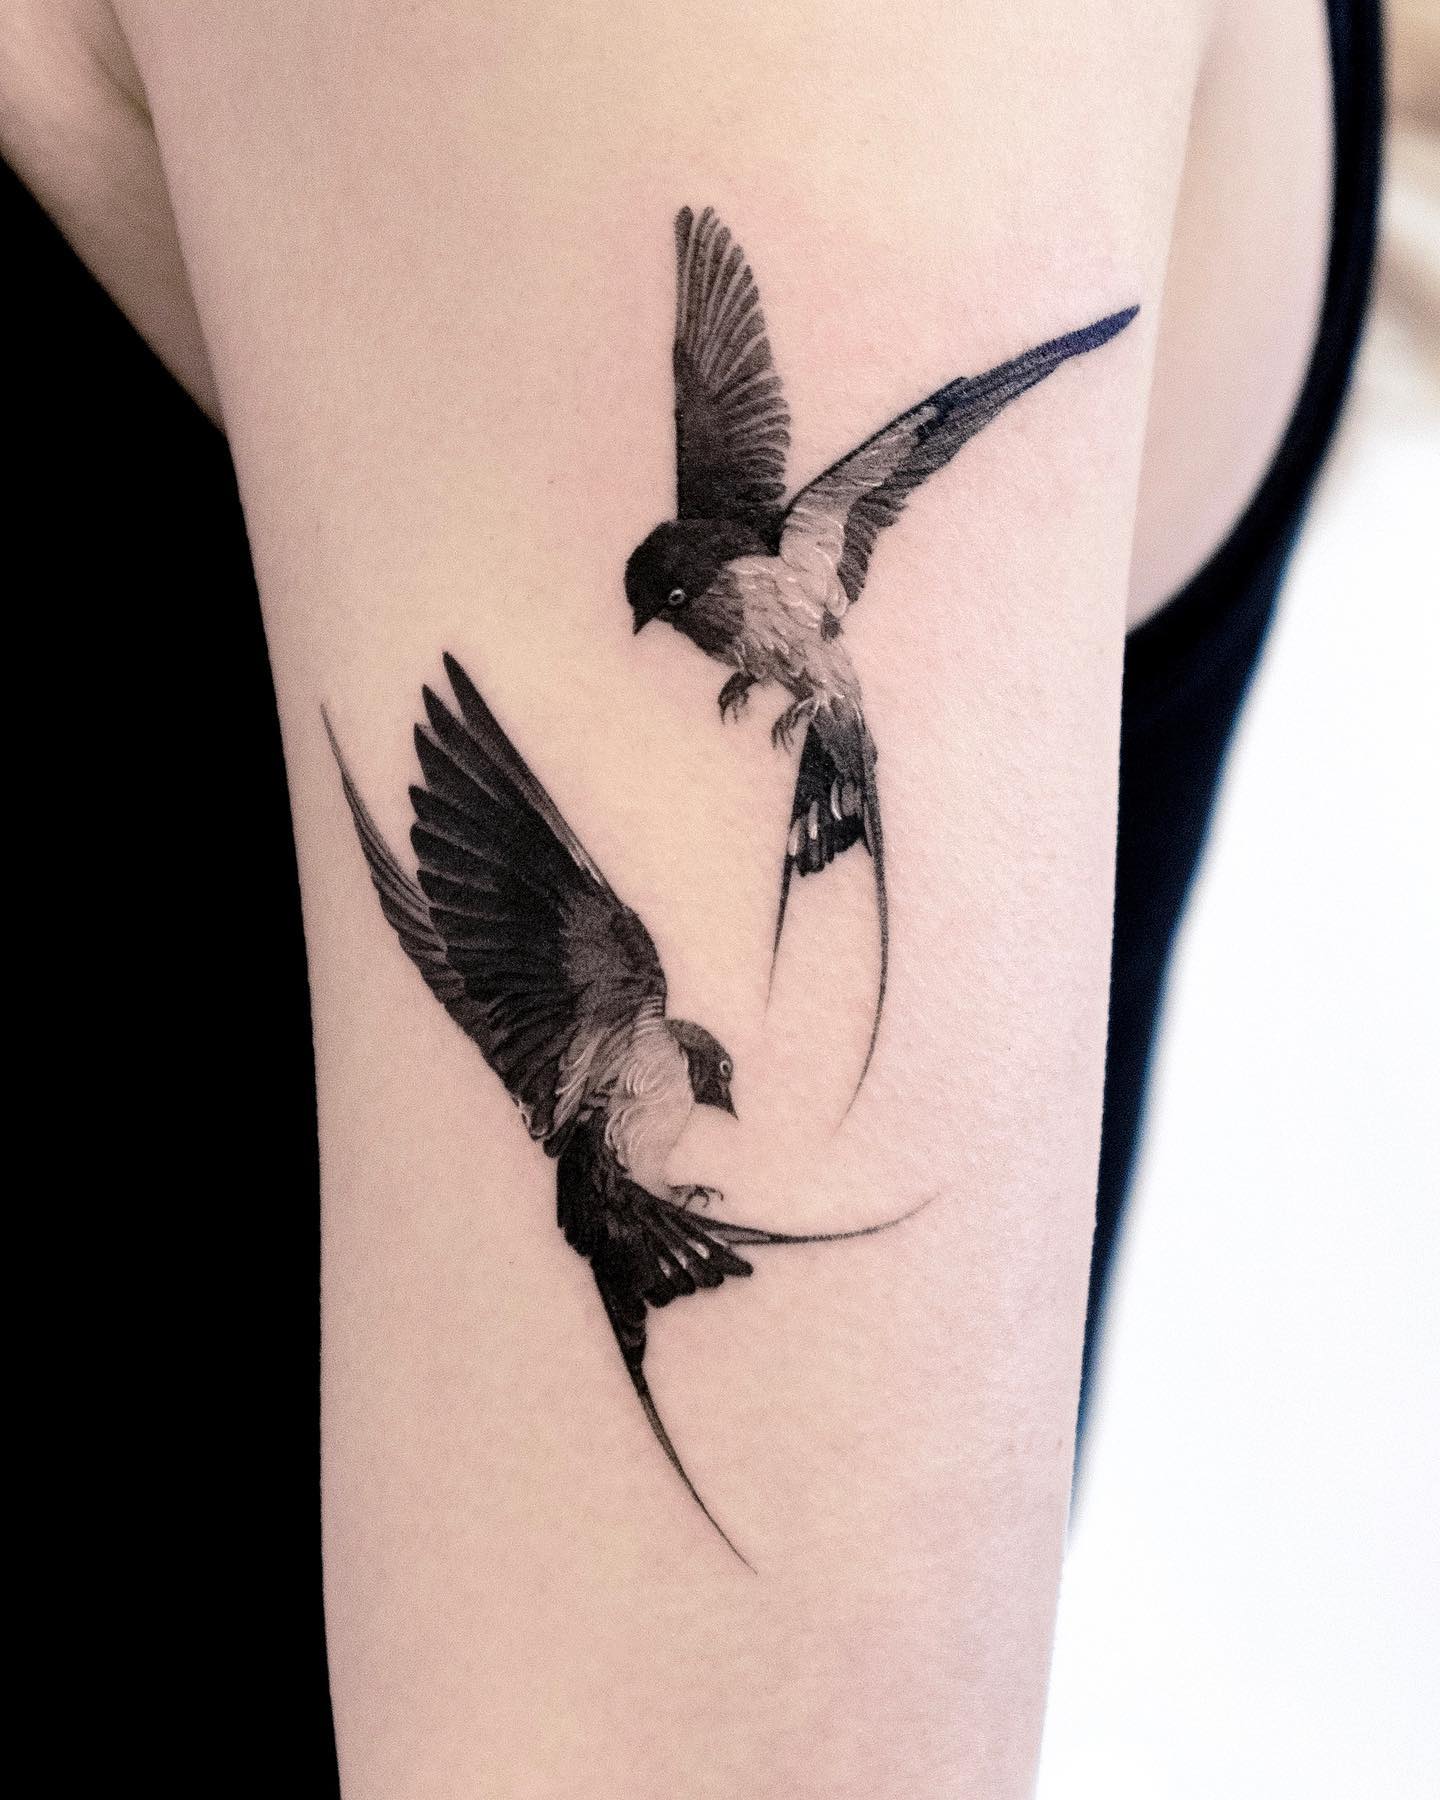 10 Amazing Swallow Tattoo Designs & Their Meaning